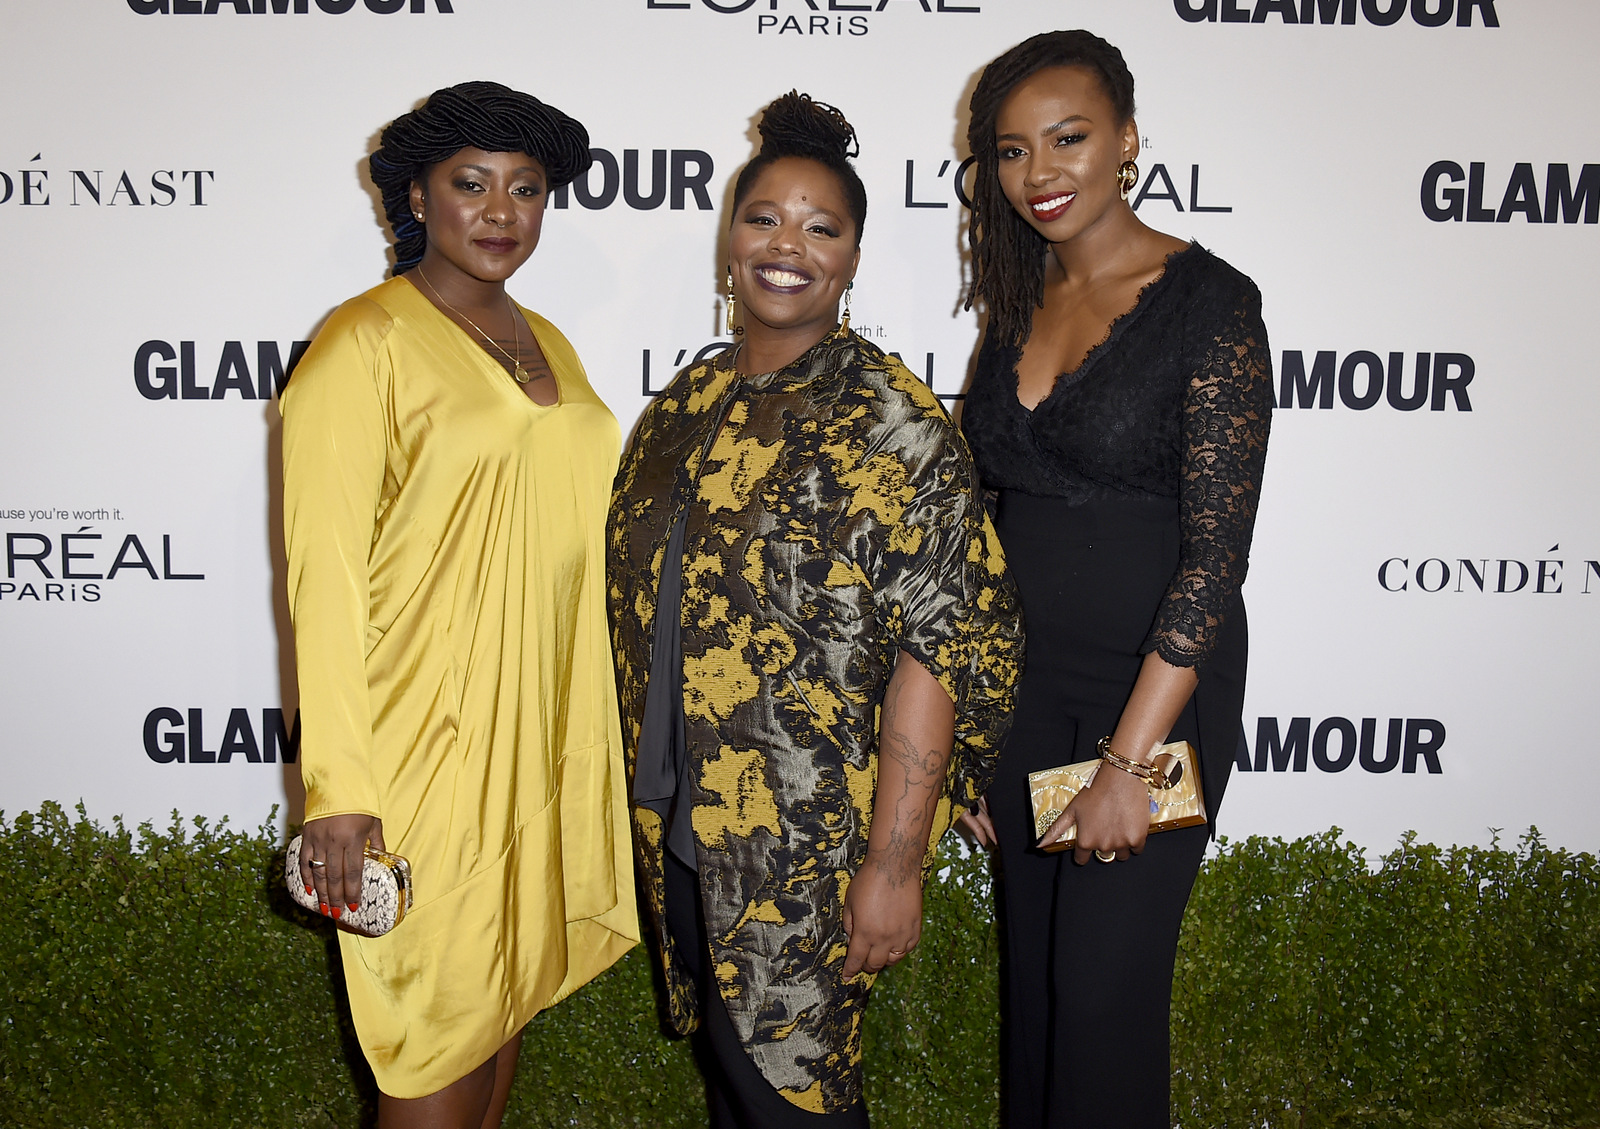 Alicia Garza, from left, Patrisse Cullors and Opal Tometi, co-founders of the Black Lives Matter movement, arrive at the Glamour Women of the Year Awards at NeueHouse Hollywood on Monday, Nov. 14, 2016, in Los Angeles. (Photo: Jordan Strauss/Invision/AP)